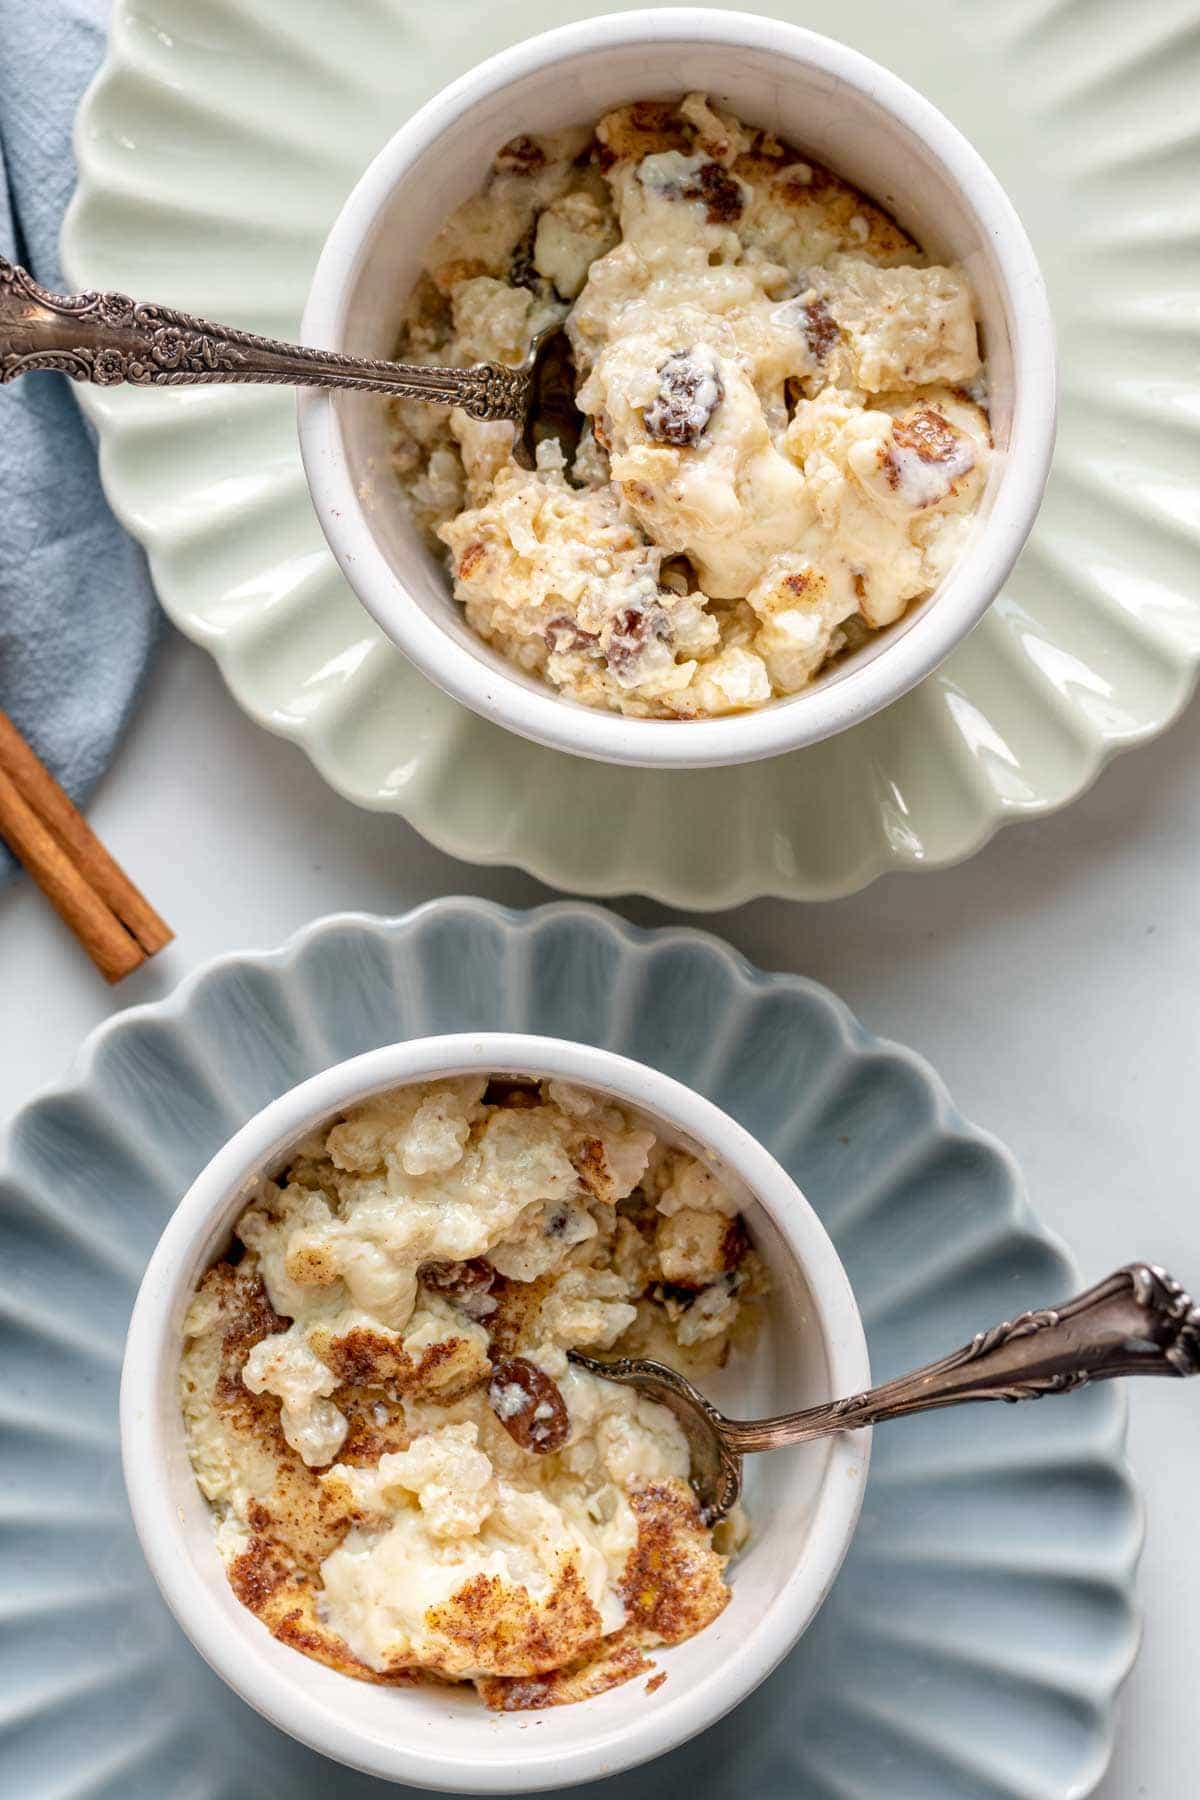 Scrumptious Baked Rice Pudding: A Tale of Comfort and Flavor